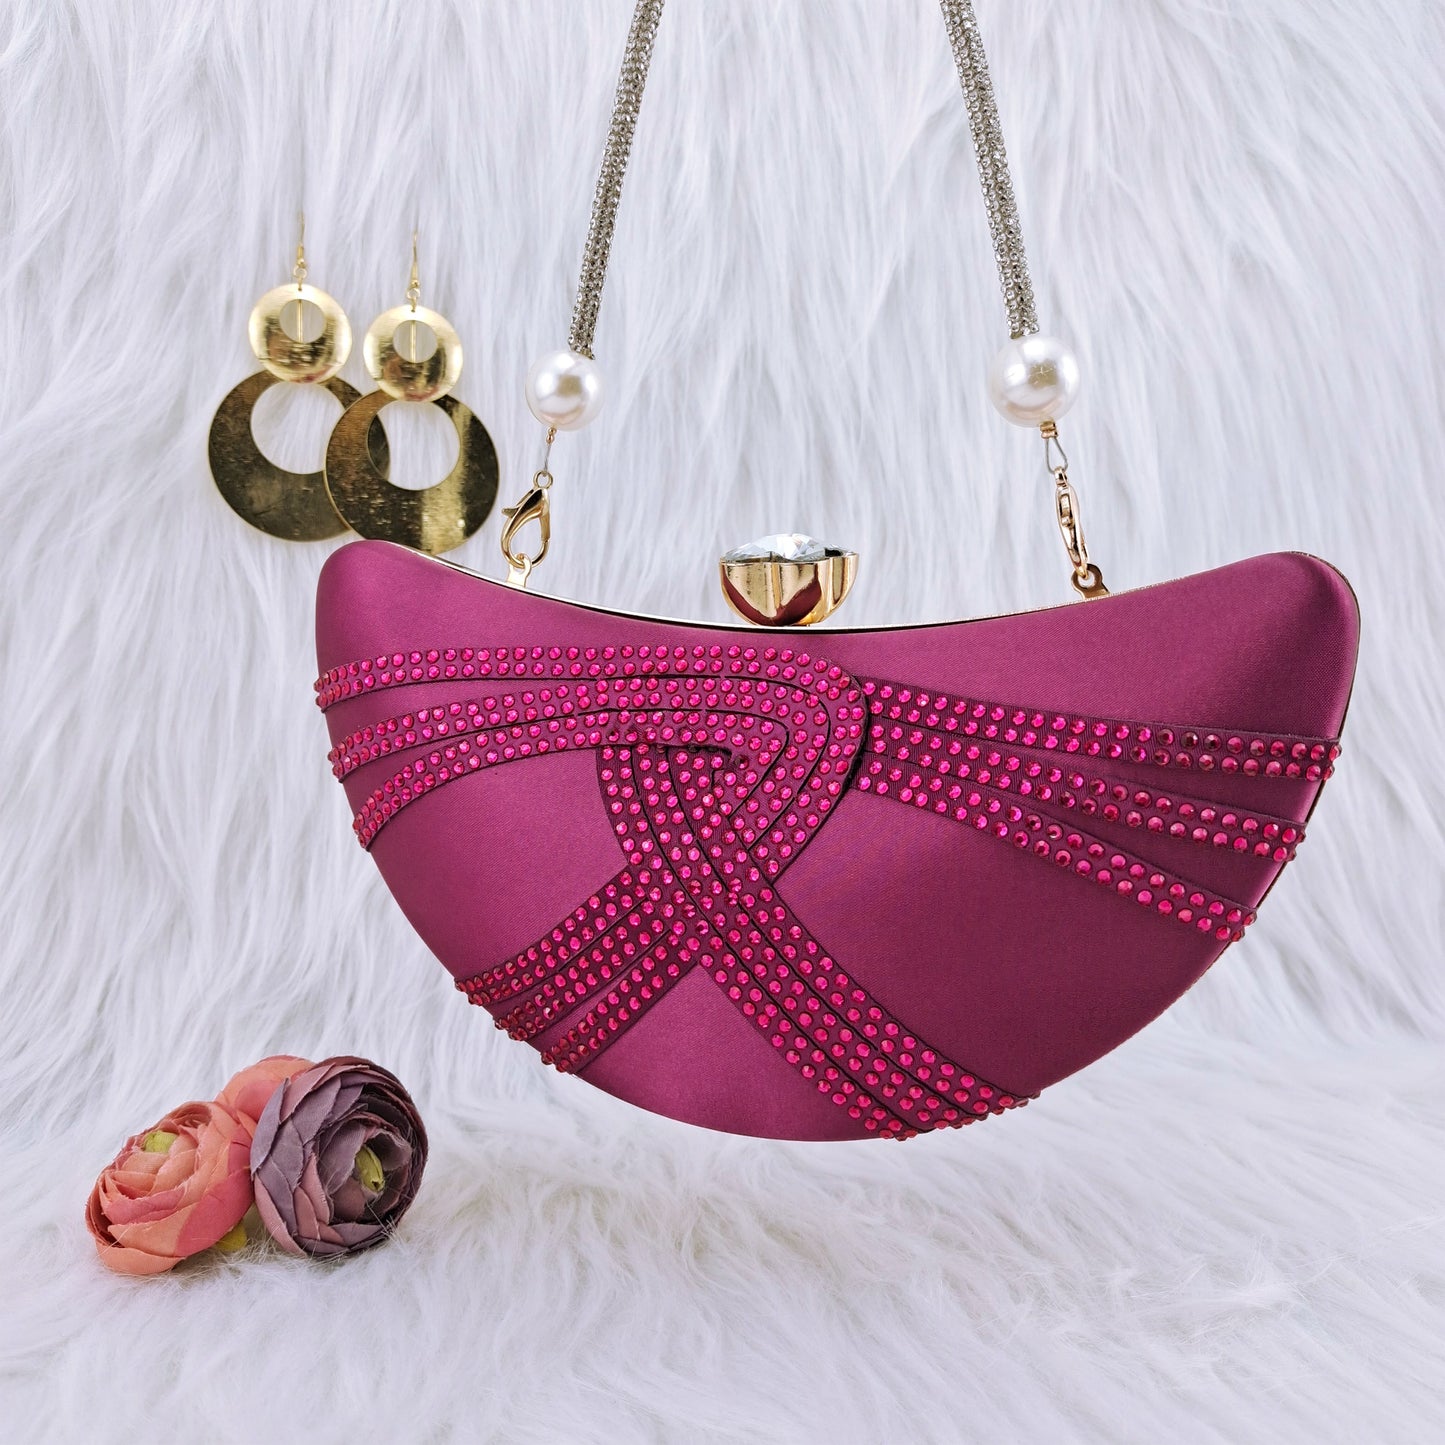 QSGFC New Italian Design Magenta Diamond Belt With The Same Color Cashew Bag Exquisite Banquet Ladies Shoes And Bag